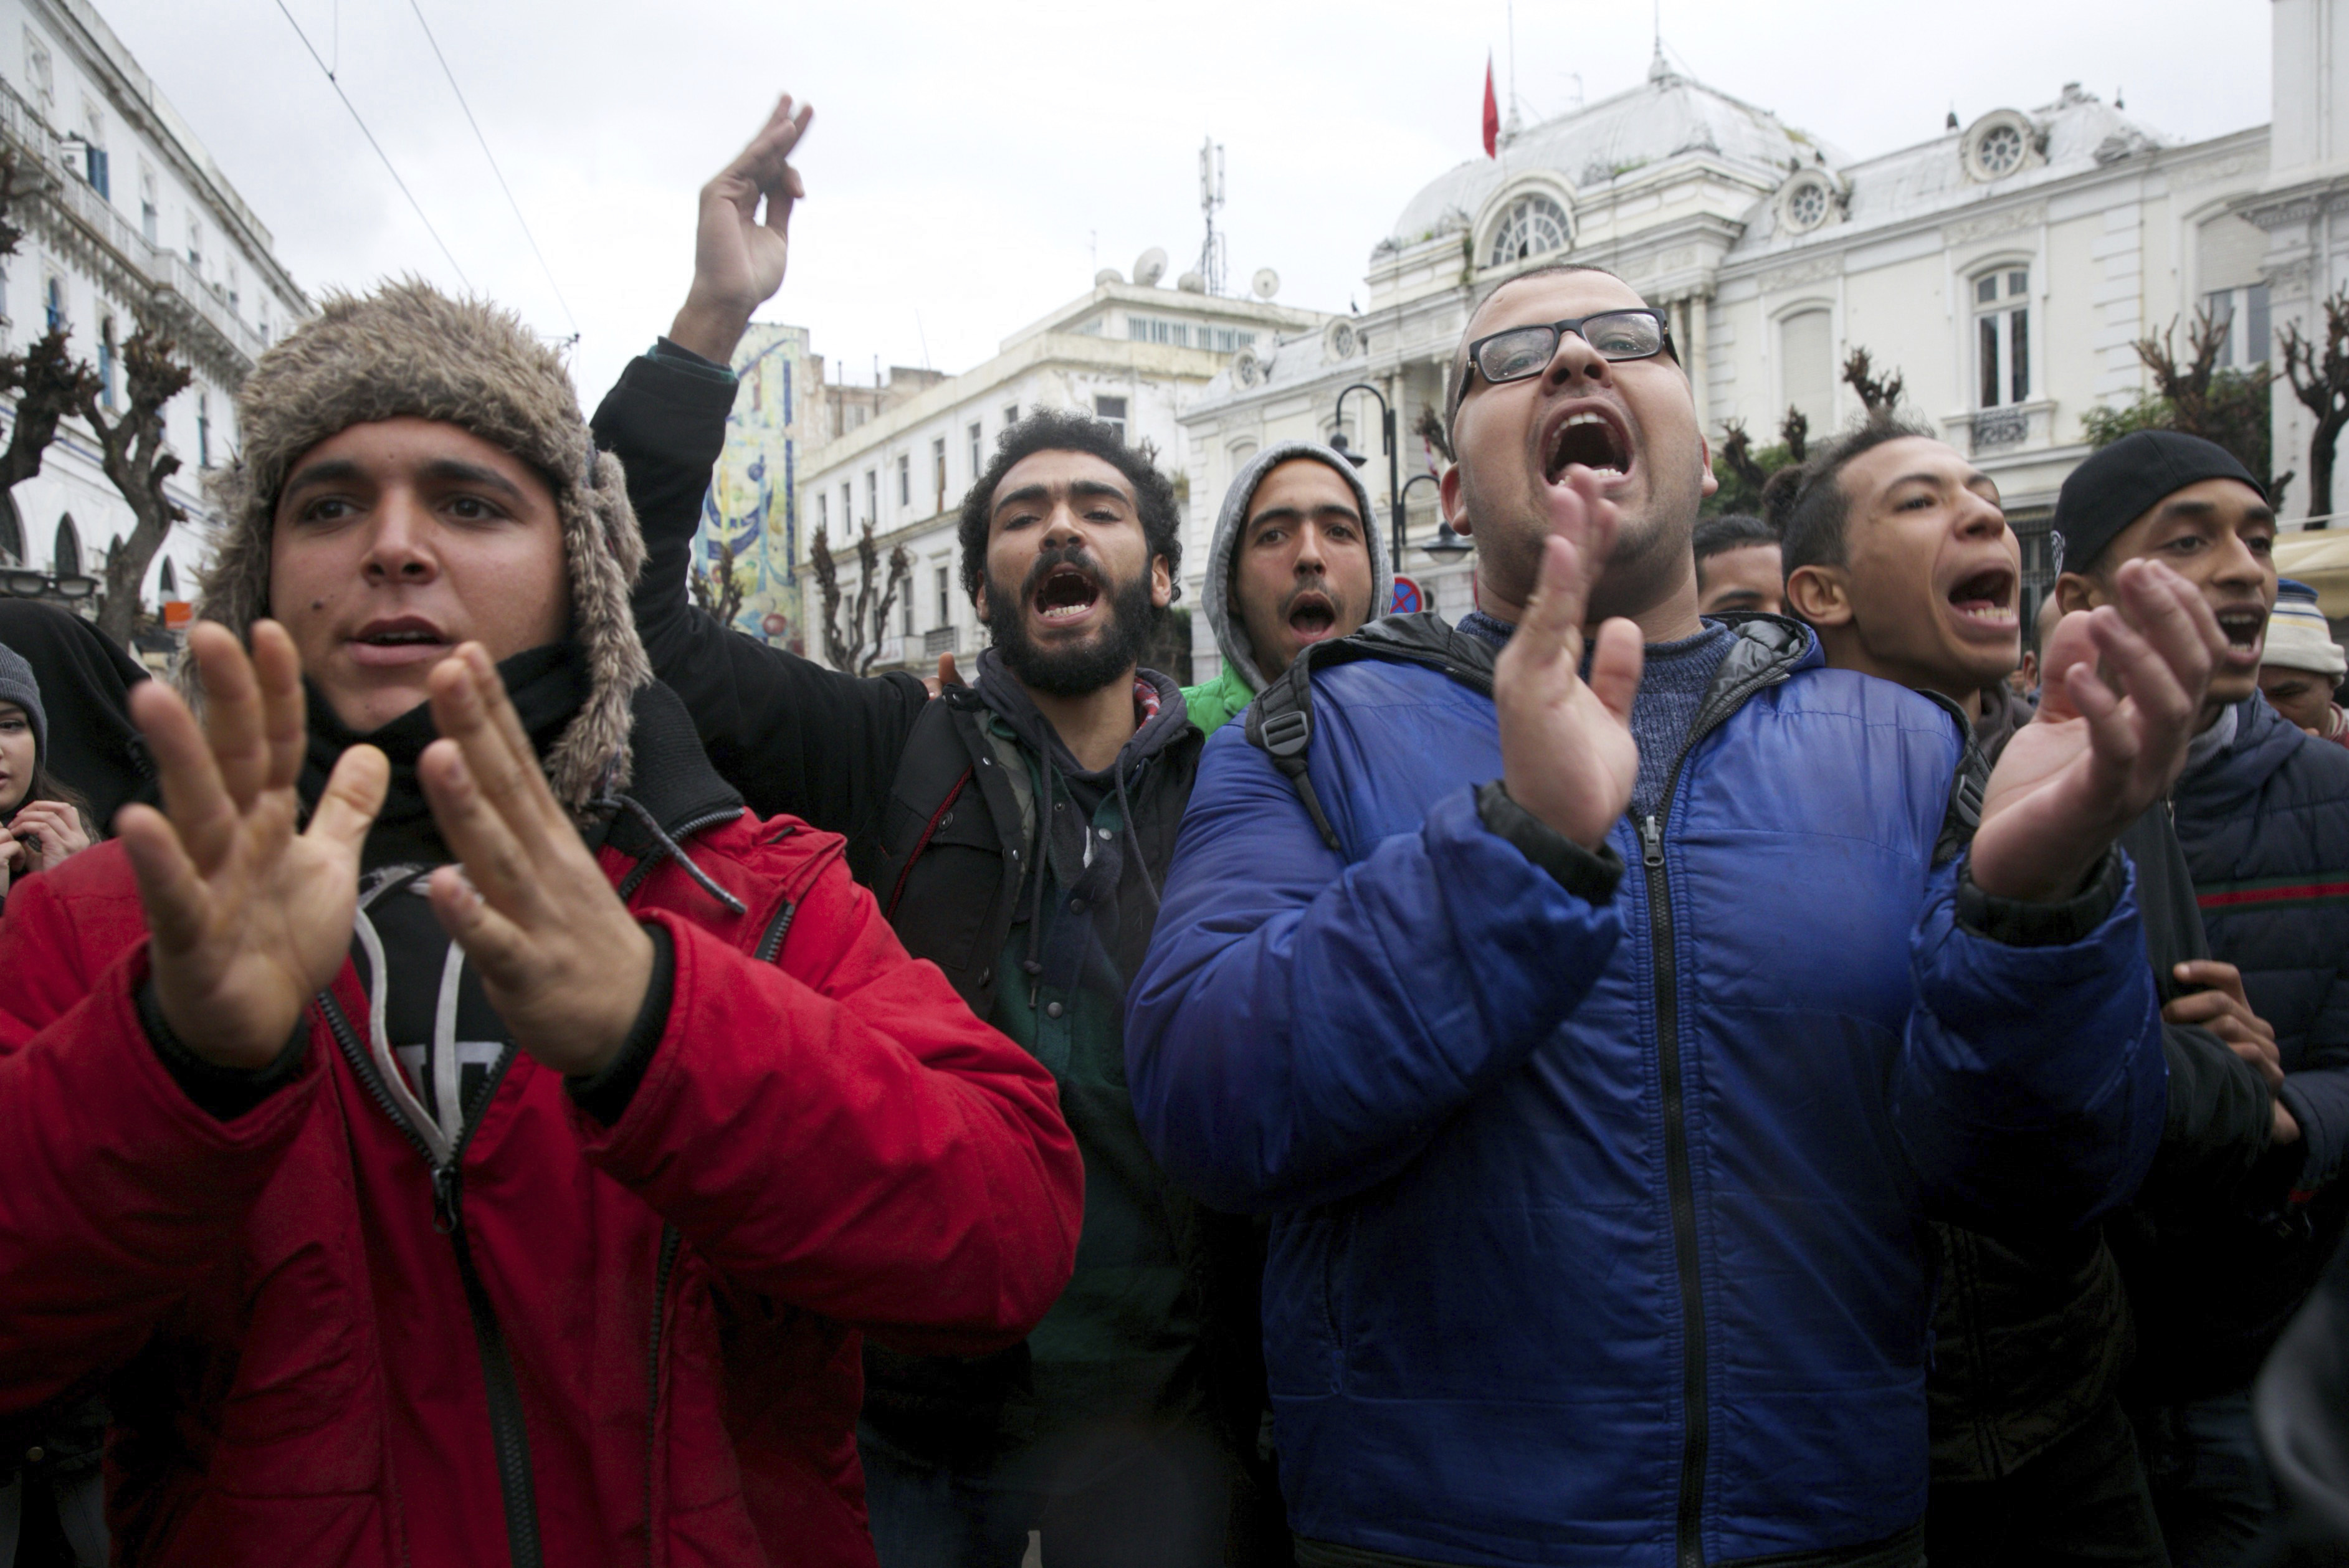 Protestors chant slogans during a demonstration in Tunis, Tunisia, Friday Jan. 12, 2018. Tunisia's government says protests appear to be subsiding after anger over food prices led to days of clashes with police that left one dead, dozens injured and widespread damage. (AP Photo/Hassene Dridi)